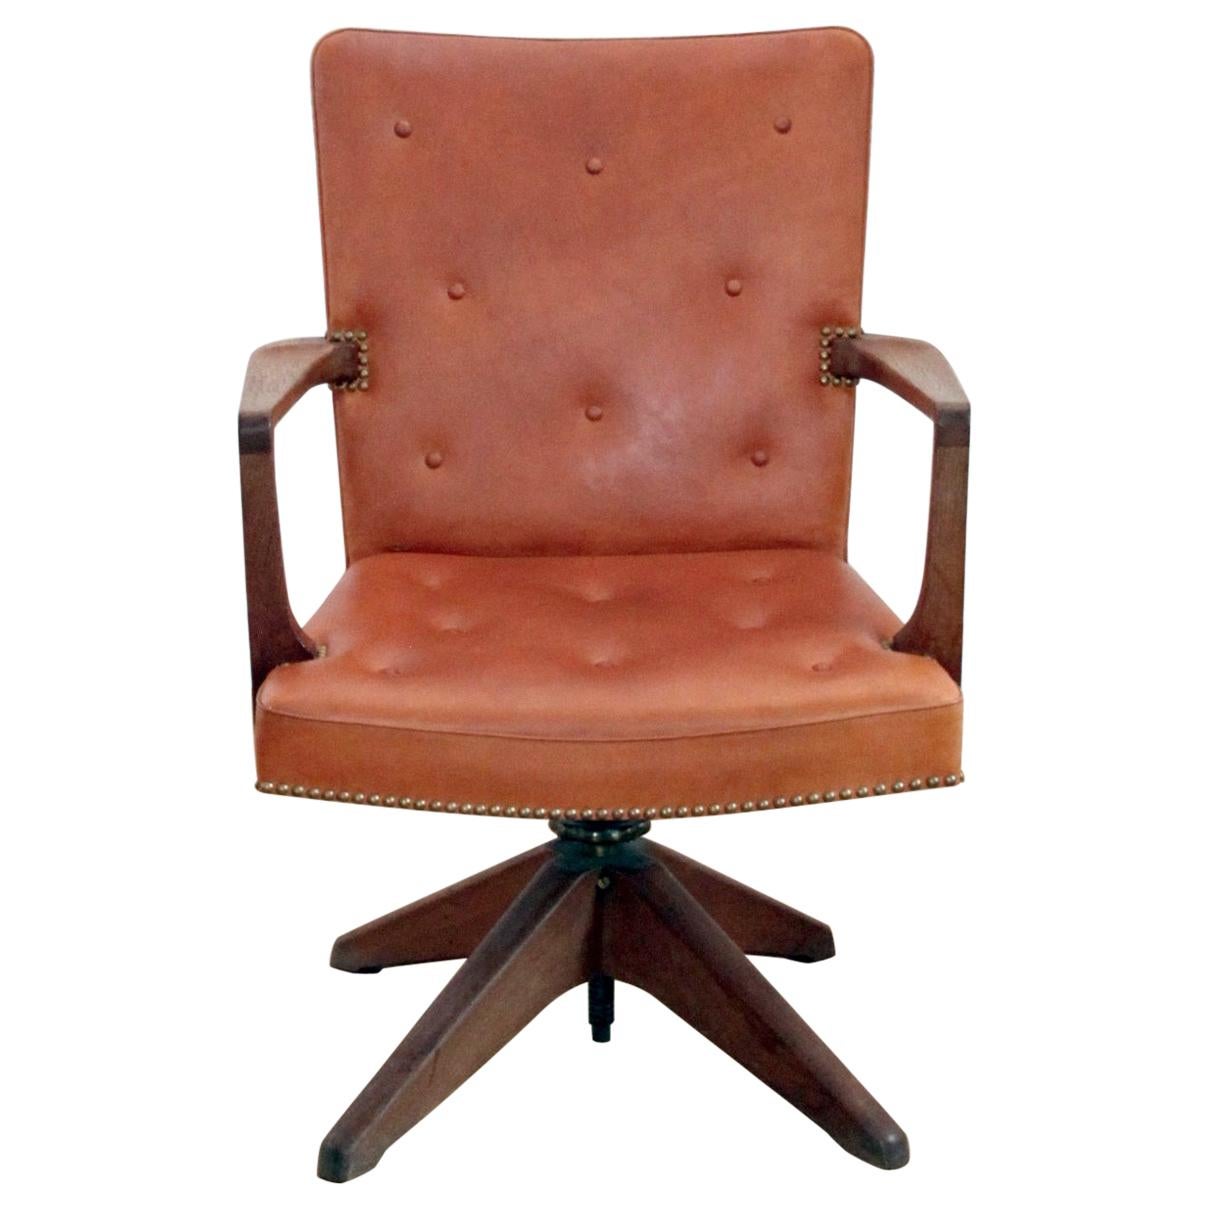 Rare Executive Desk Chair in Walnut, Brass and Leather, Palle Suenson, 1940s For Sale